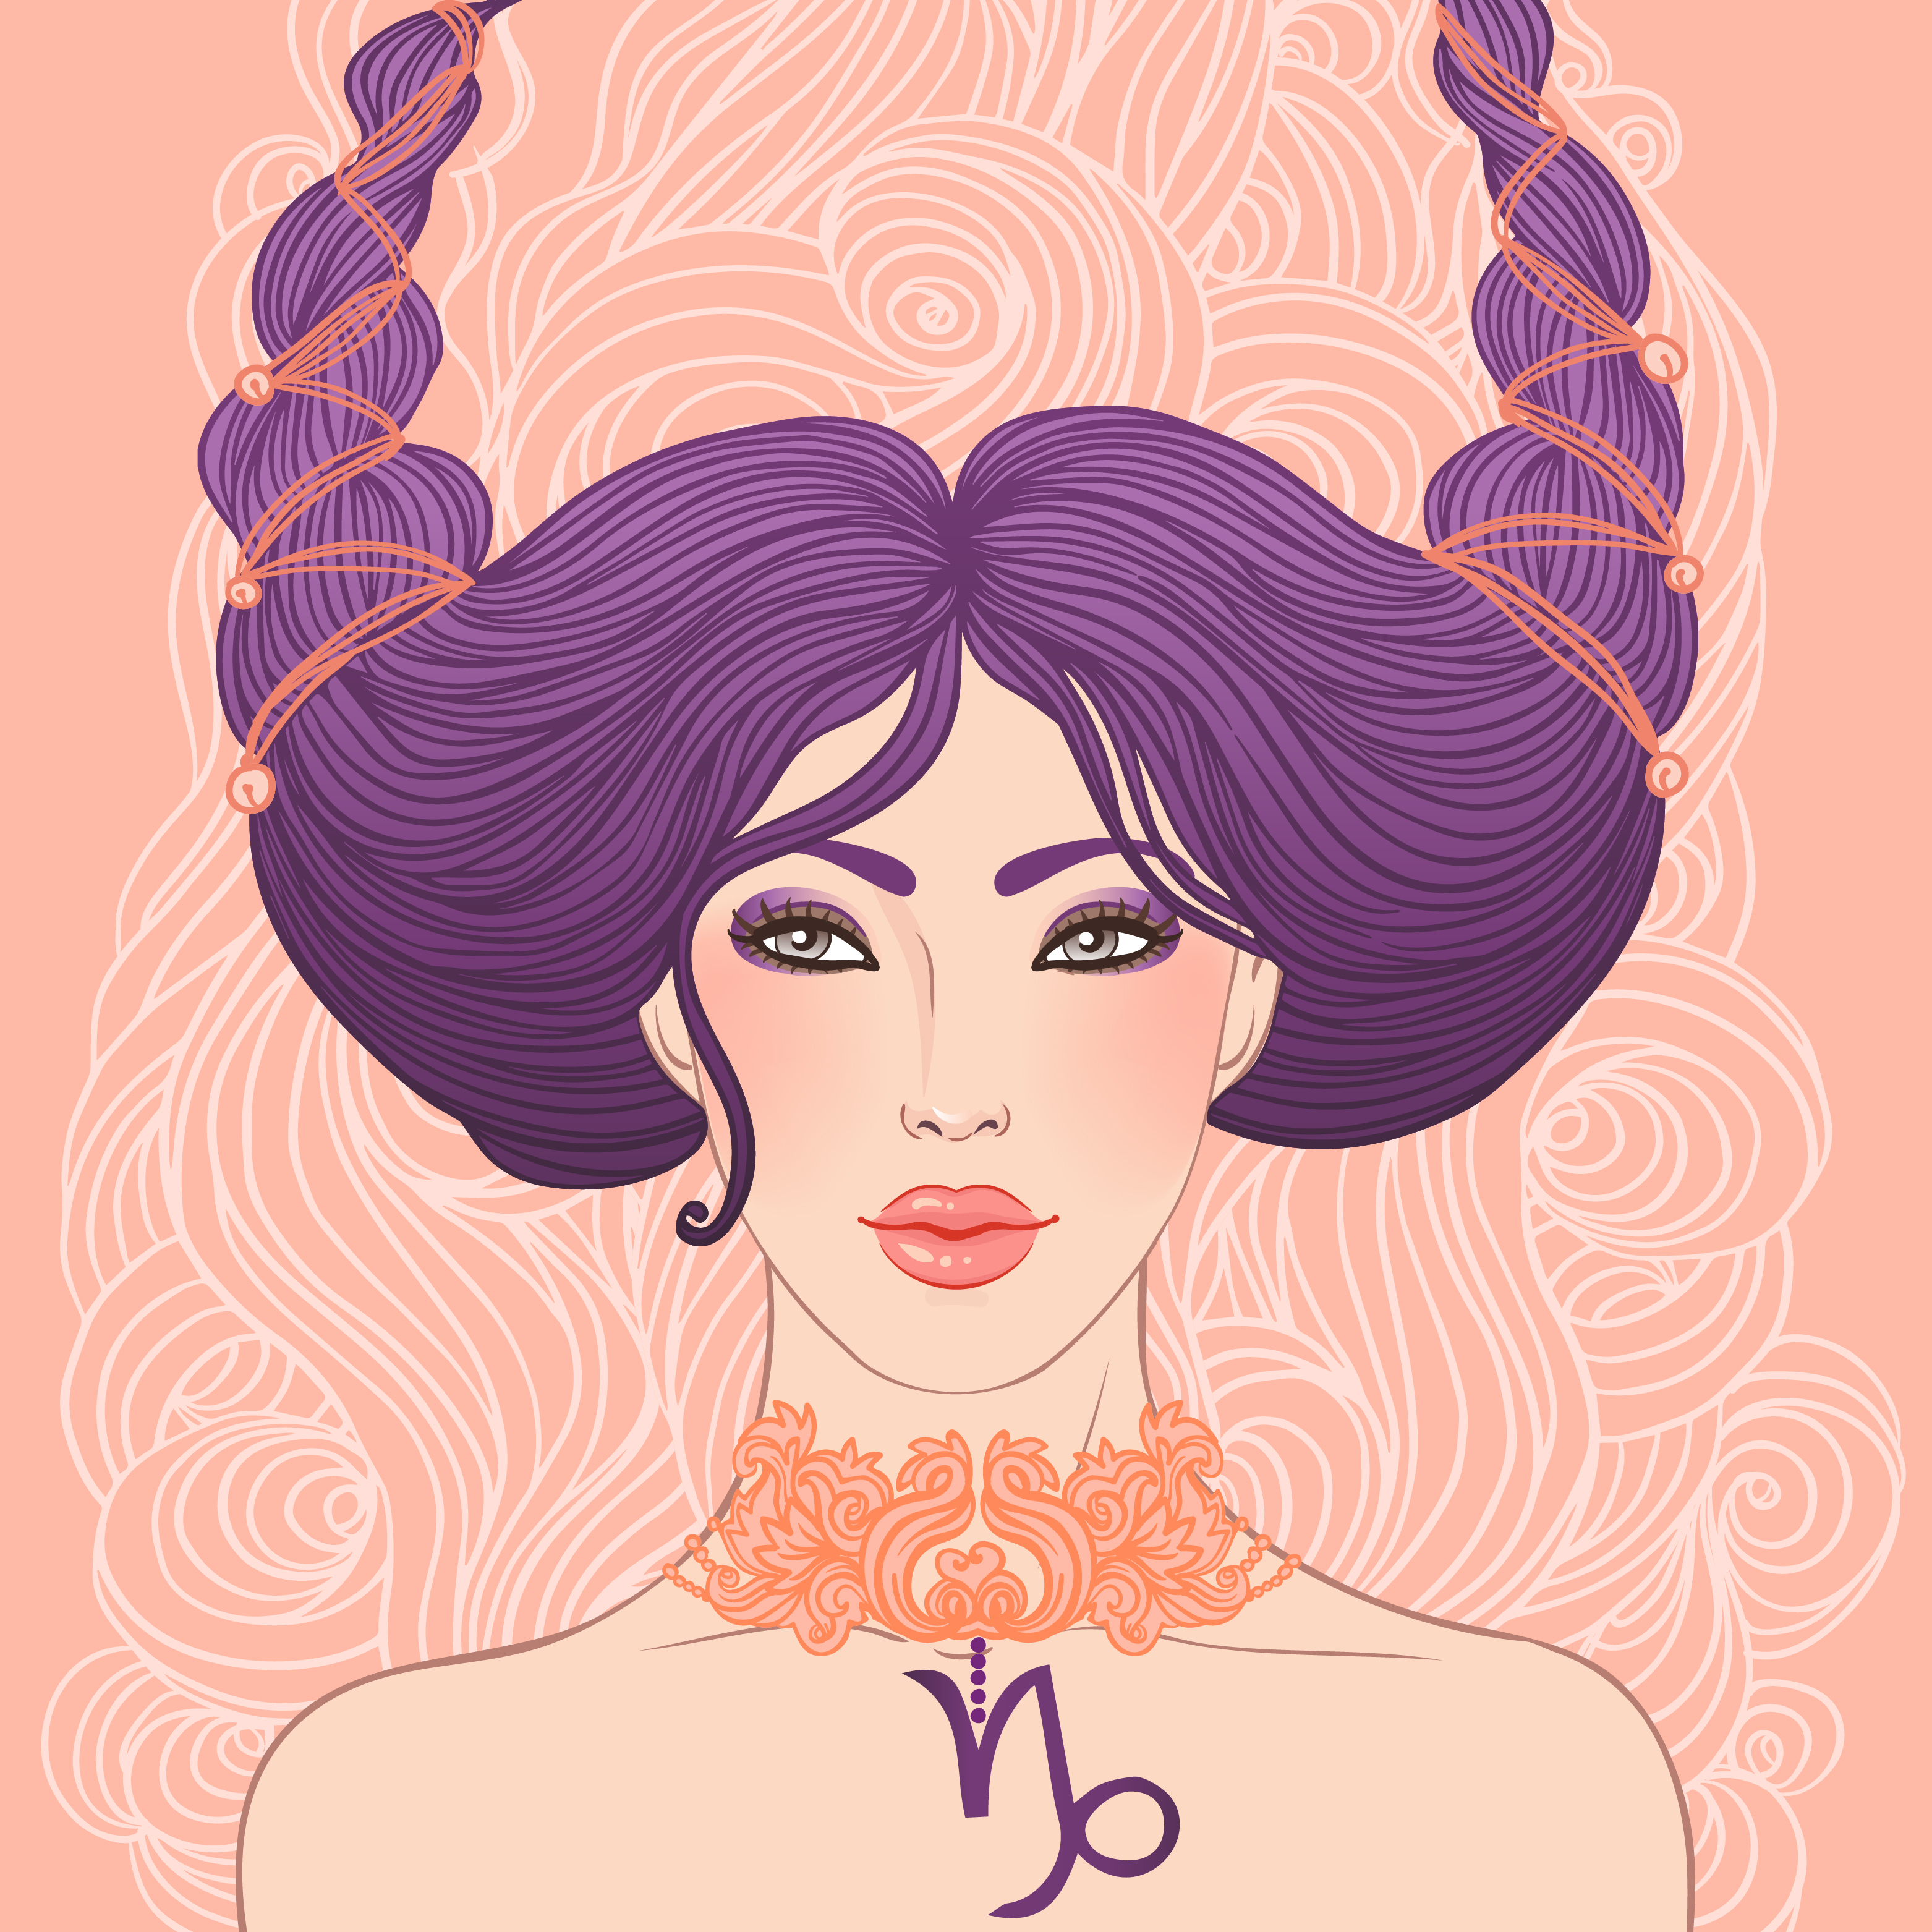 An illustration of a woman representing the Capricorn zodiac sign | Source: Shutterstock